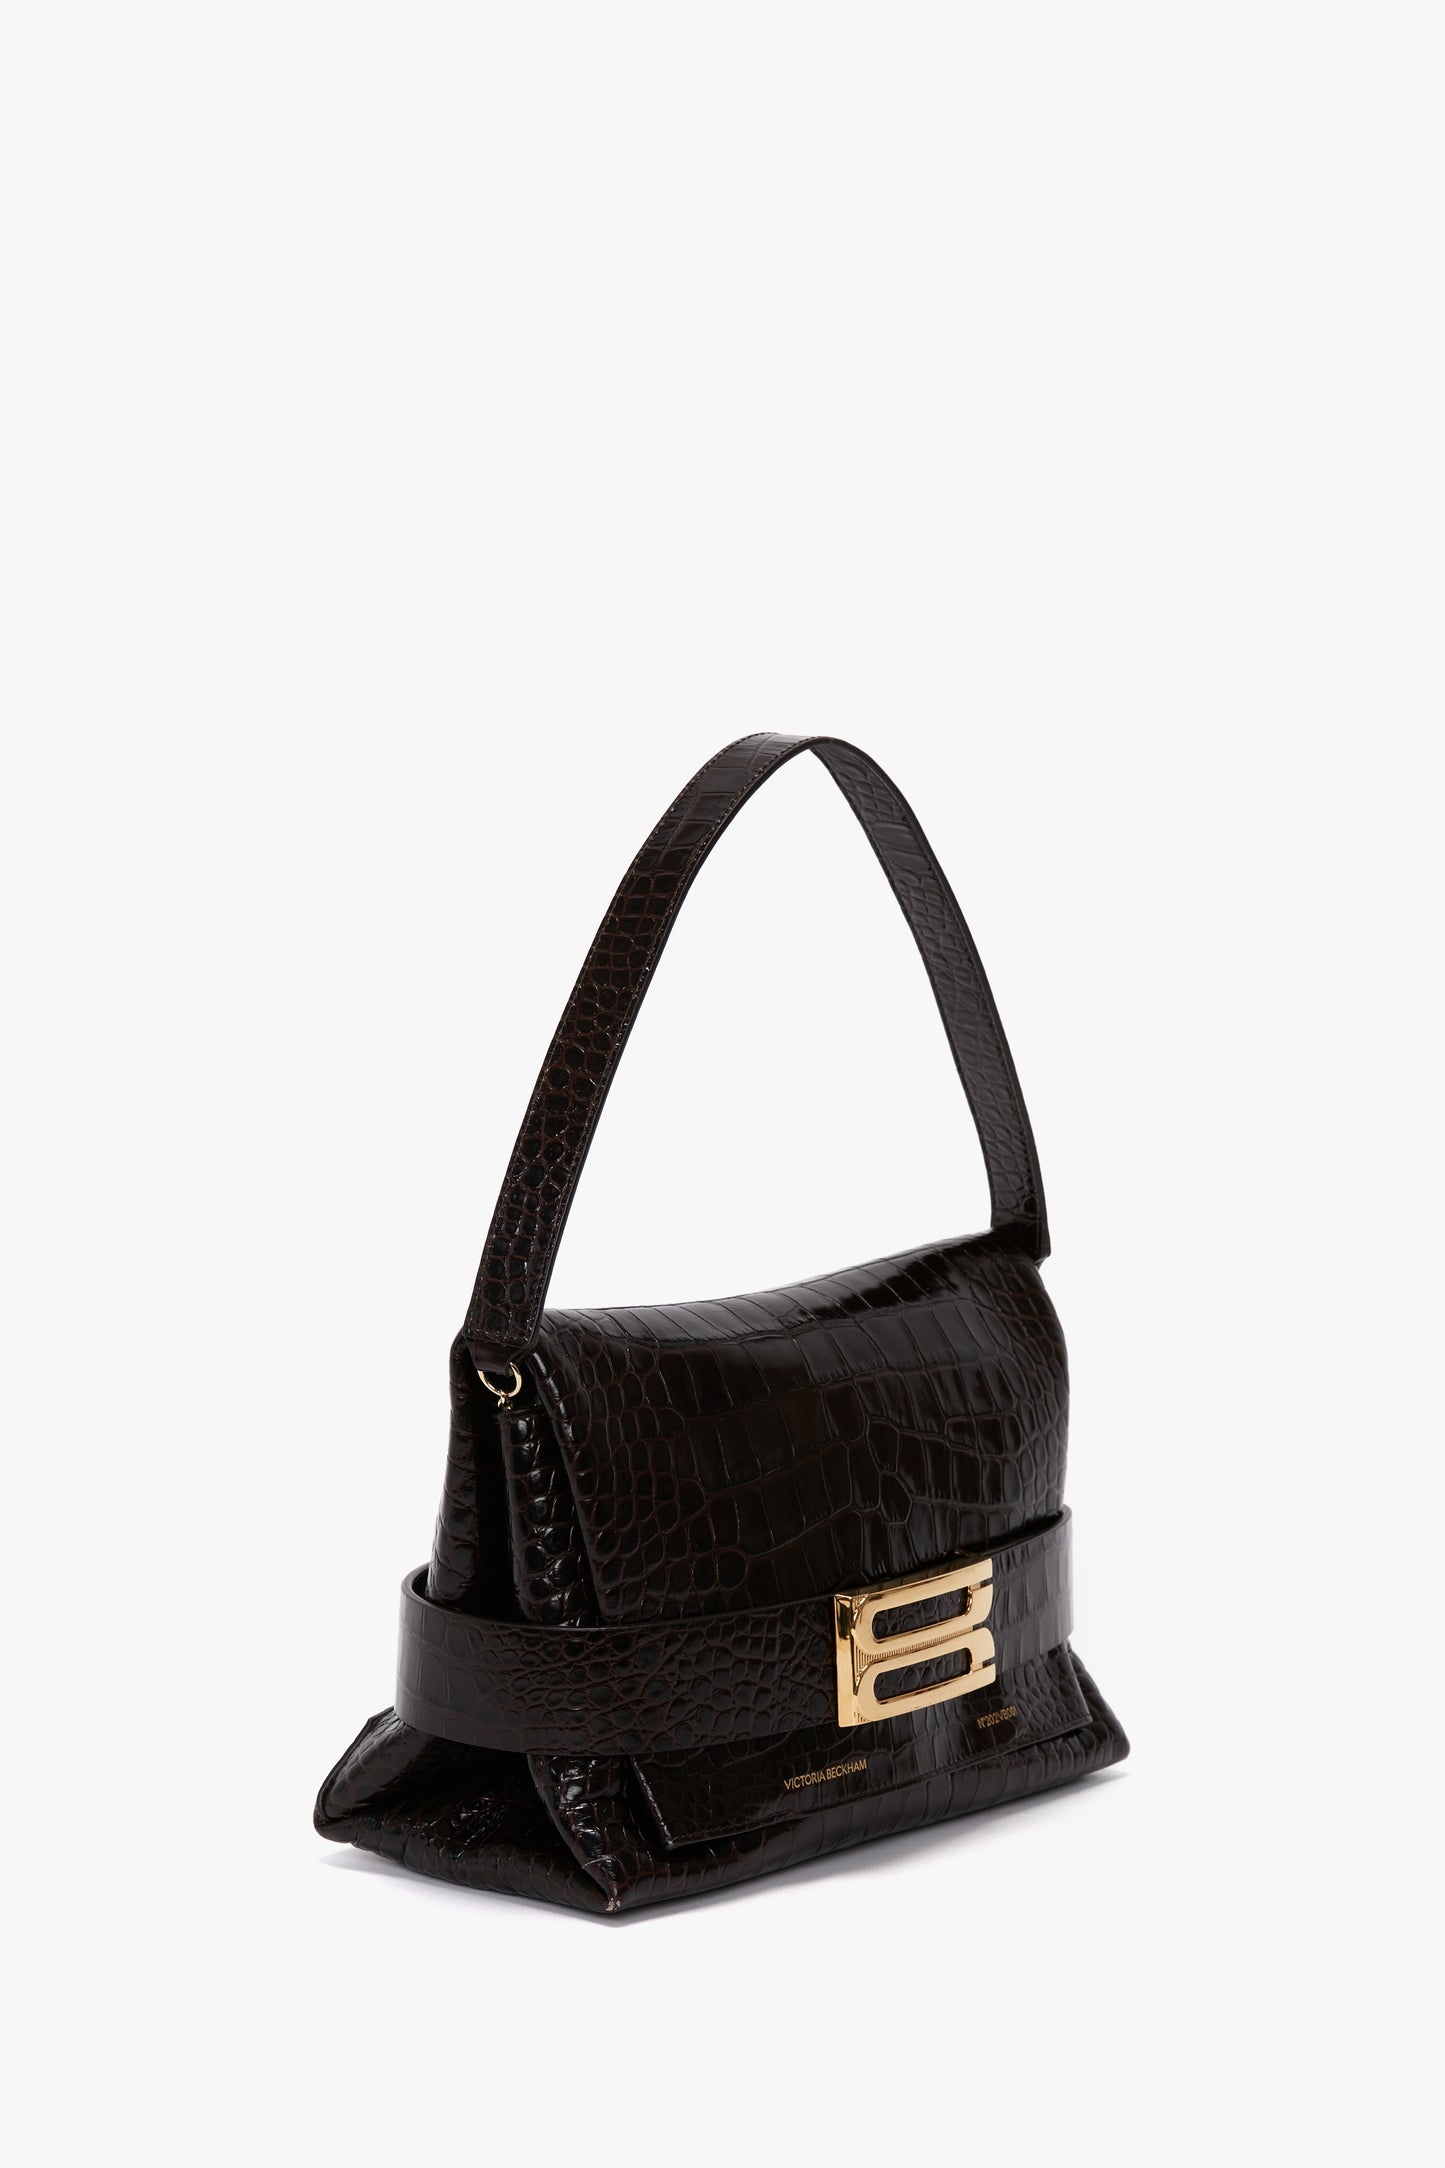 A small black leather **B Pouch Bag In Croc Effect Espresso Leather** by **Victoria Beckham**, with an embossed crocodile print, gold buckle detail, a single handle, and a detachable shoulder strap.